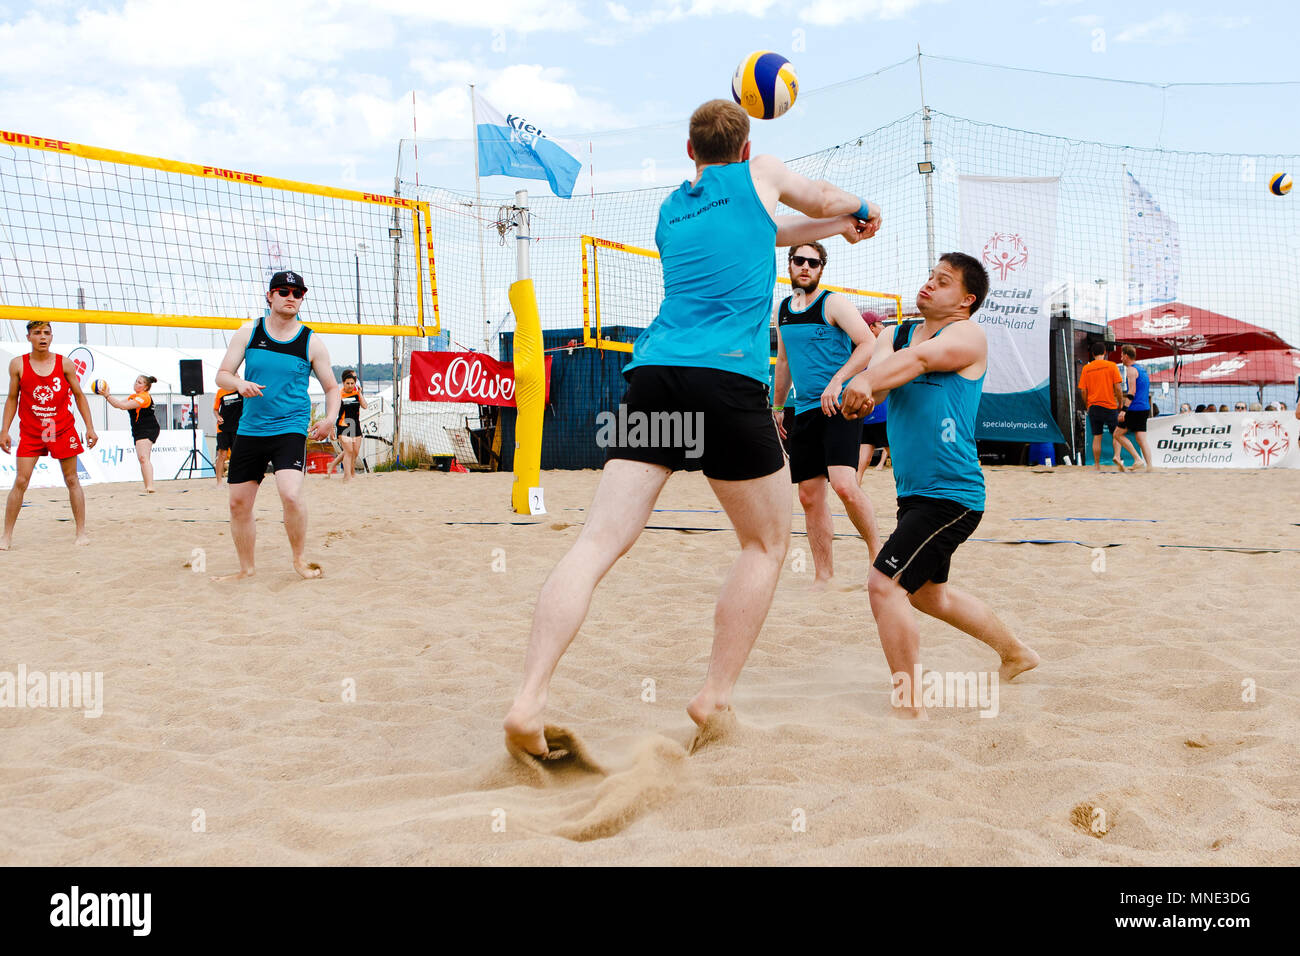 16 May 2018, Germany, Kiel: Matthias Aigner (L-R), Eric Letzner, Jan Thomas  Wurster and Alex Stadelhofer competing at the special olympics - the  national summer games for people with mental or multiple